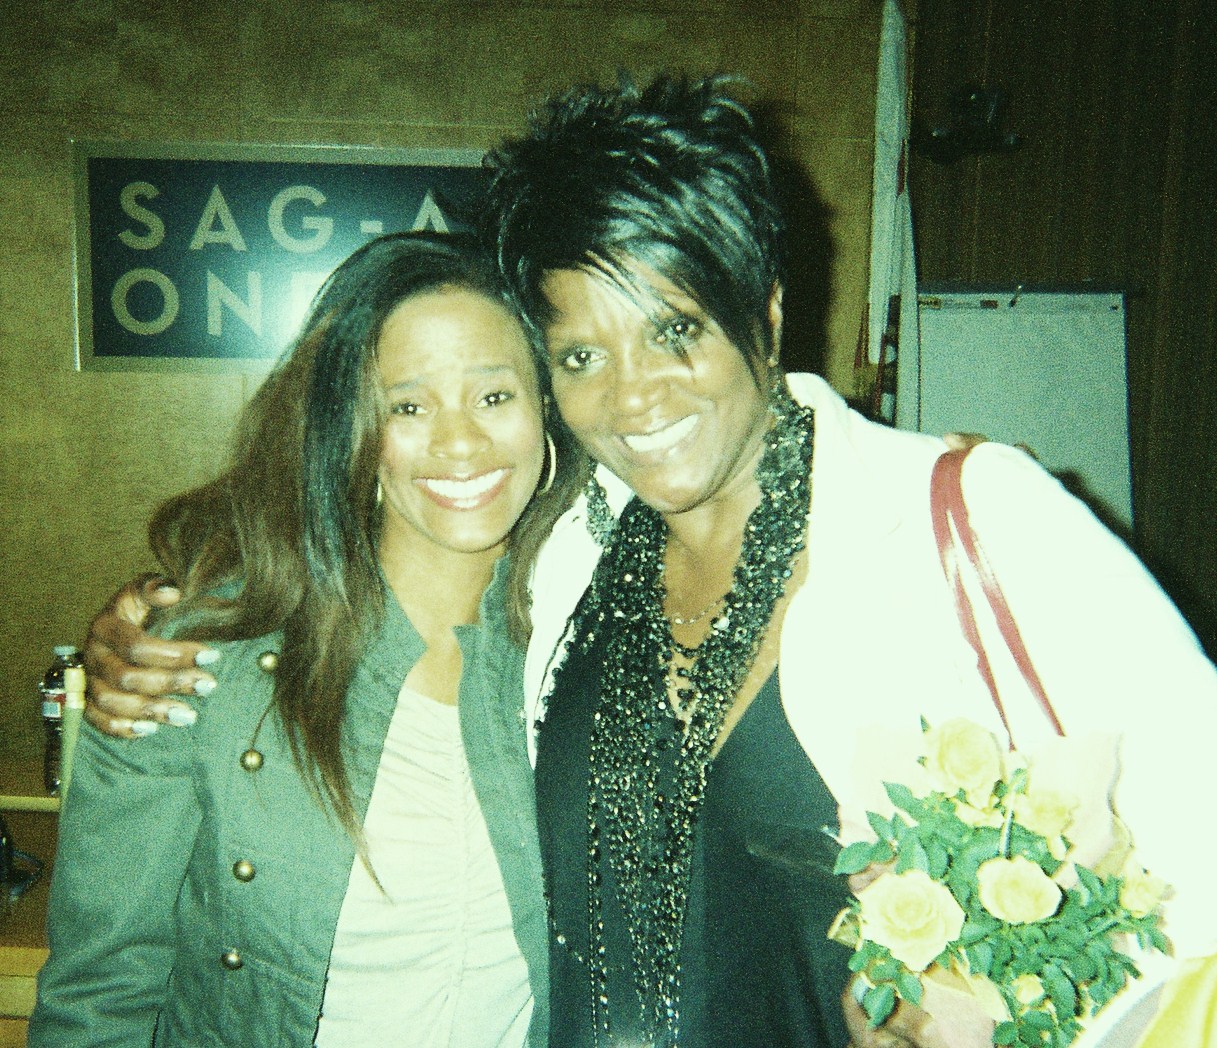 Germany Kent with actress Anna Marie Horsford